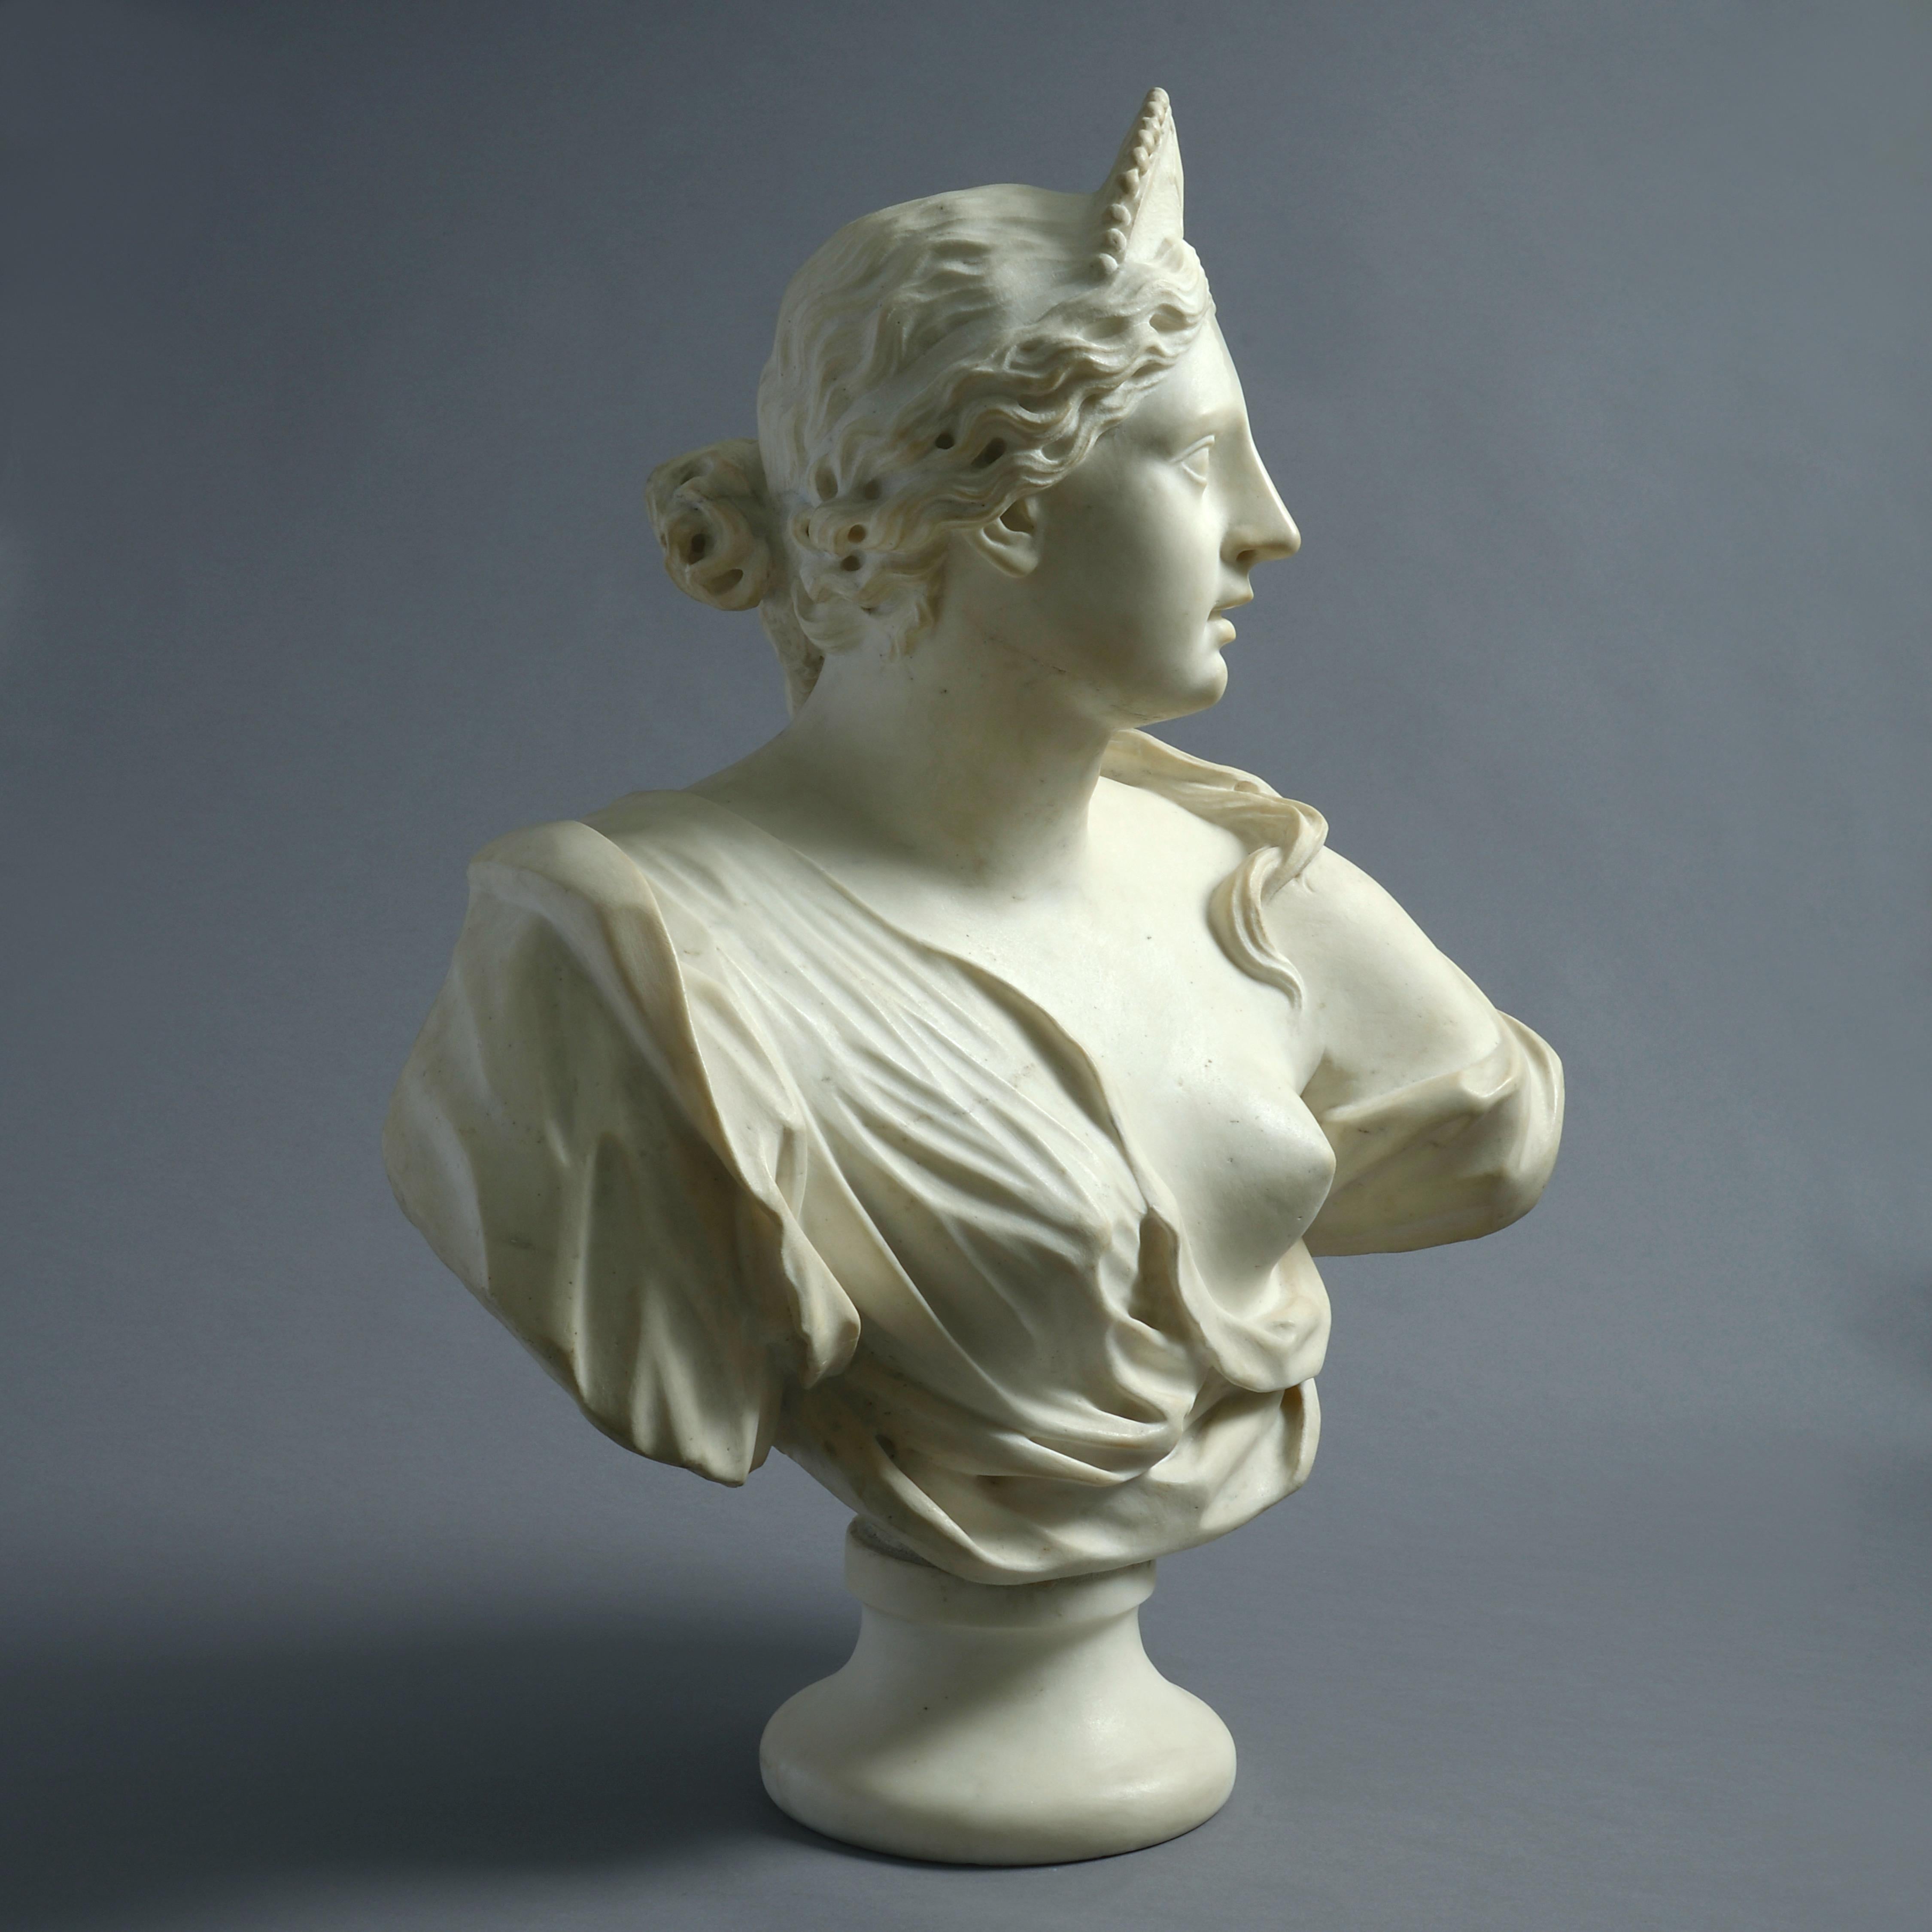 Italian, early 18th century

A bust of a woman wearing a Diadem

Statuary marble

Measure: 31 in. (79cm) high.